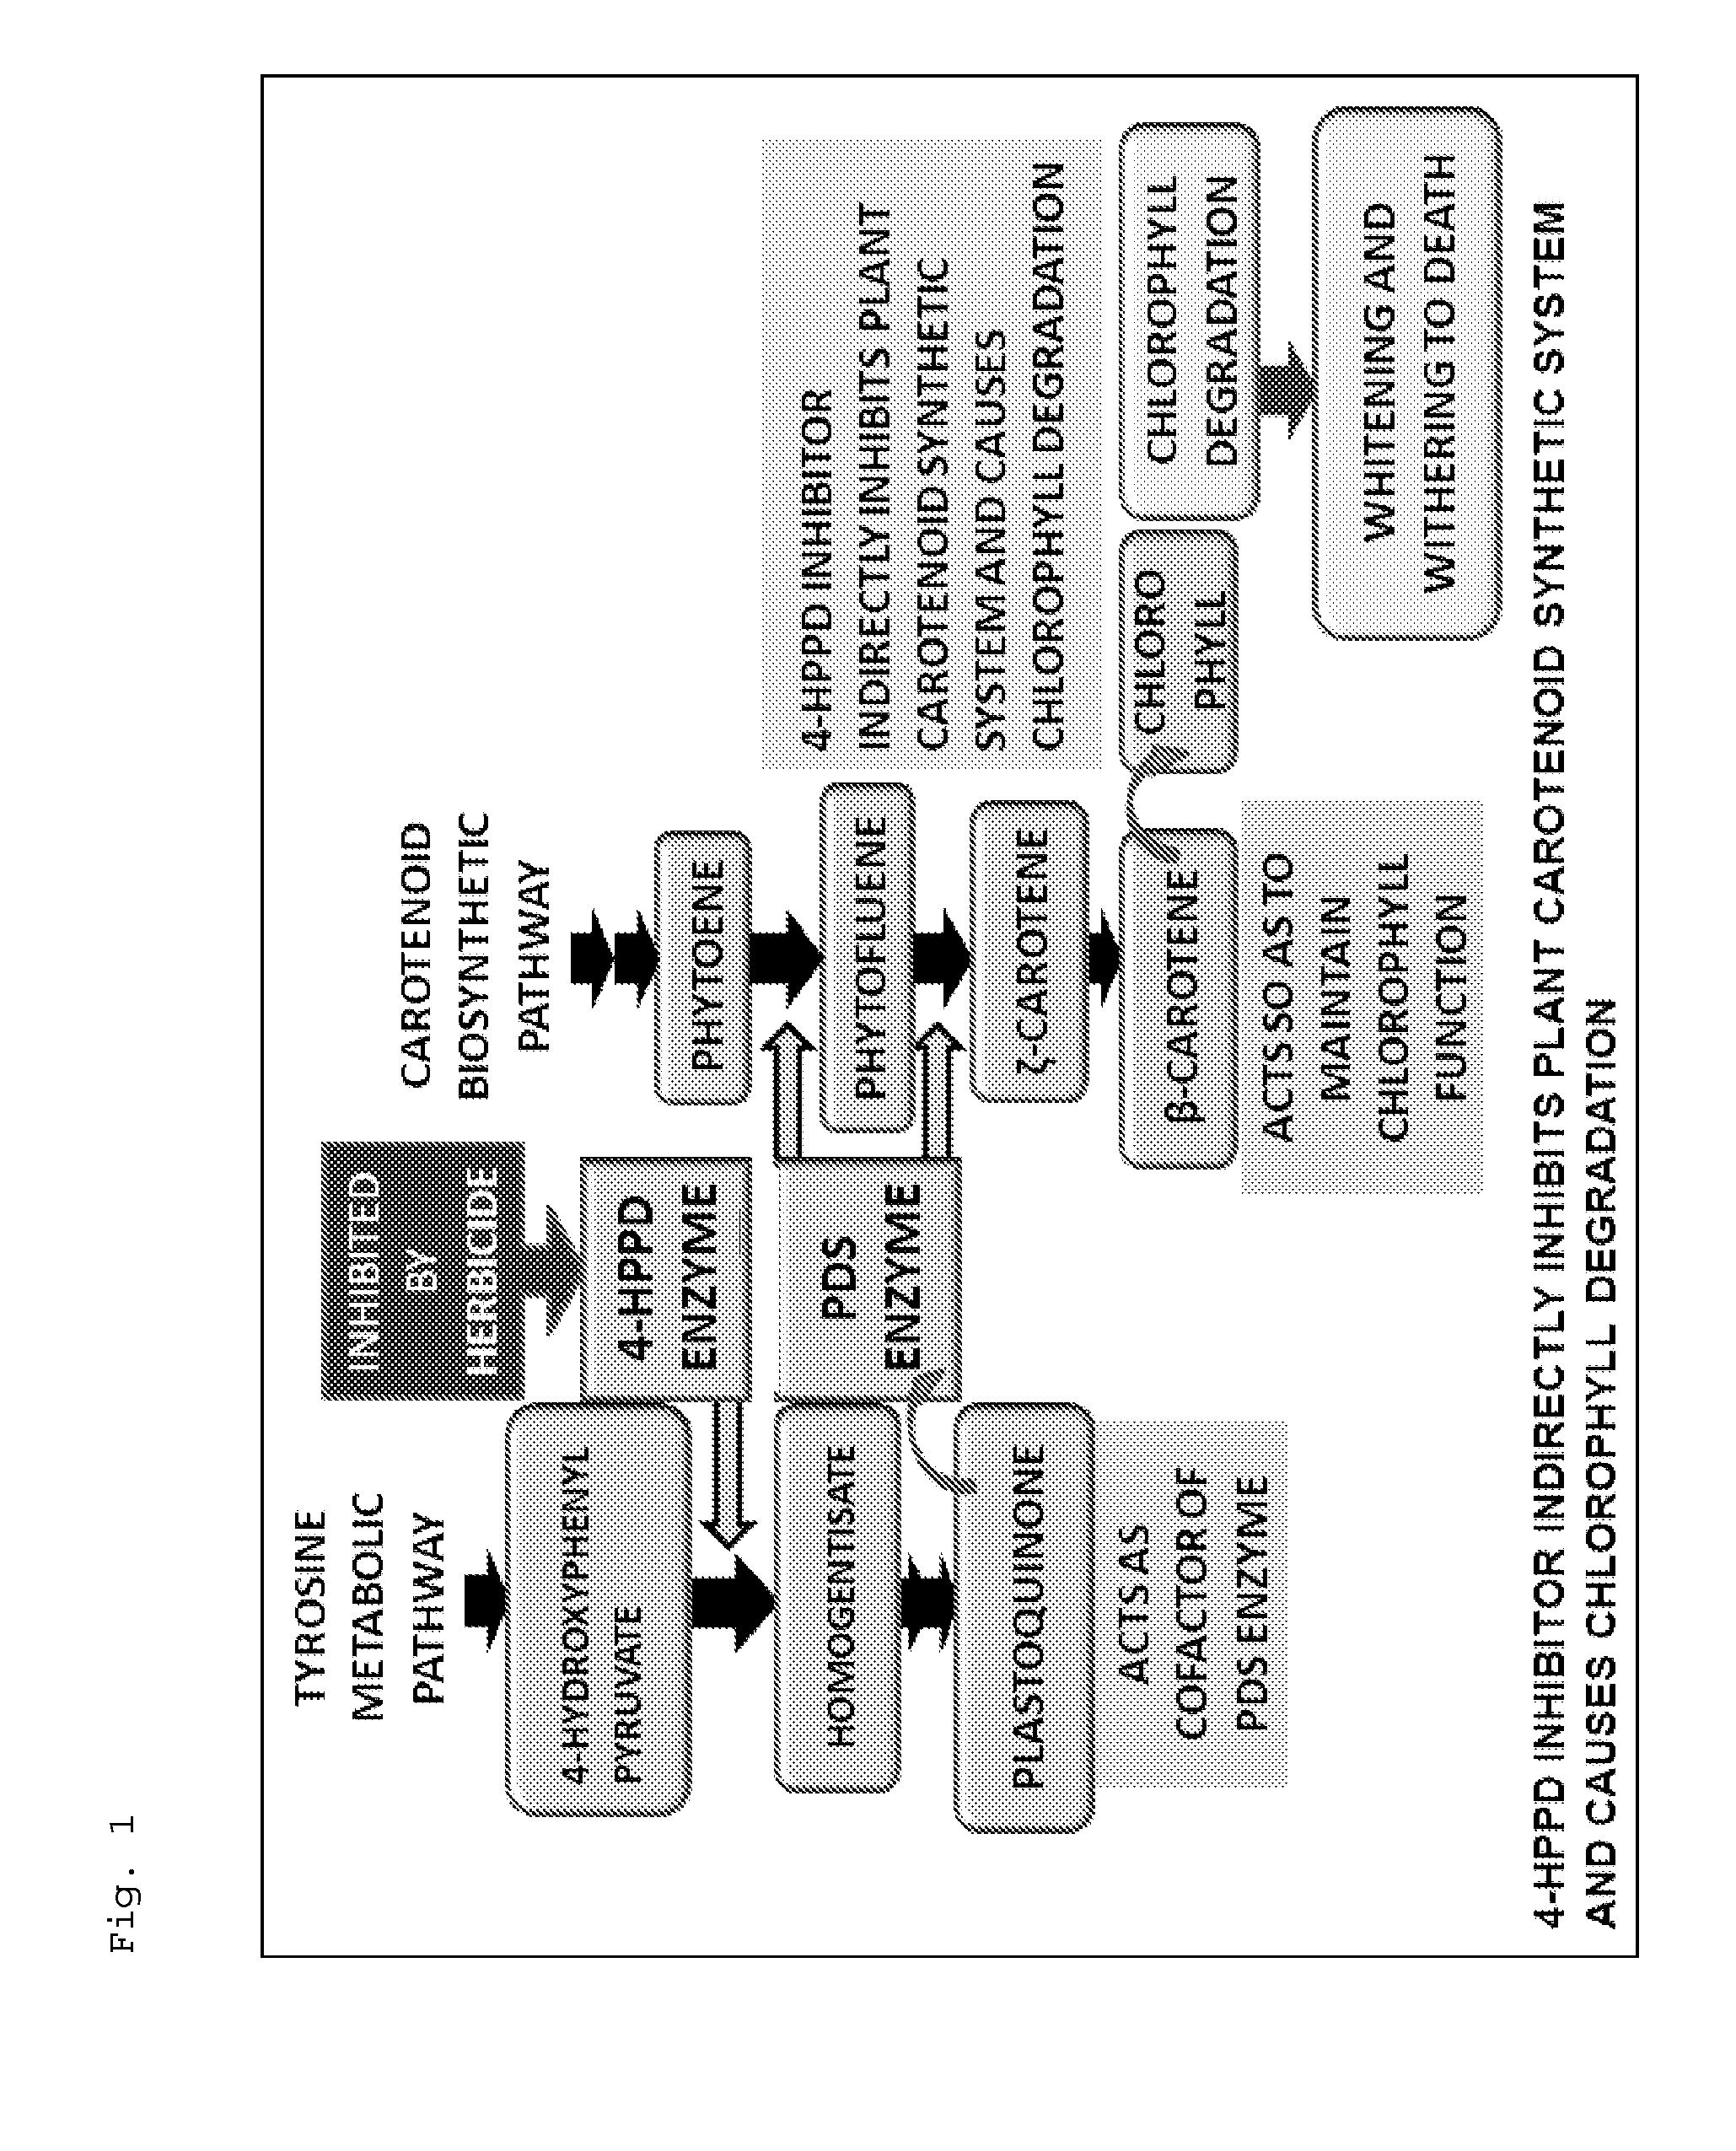 Plant having increased resistance or susceptibility to 4-hppd inhibitor